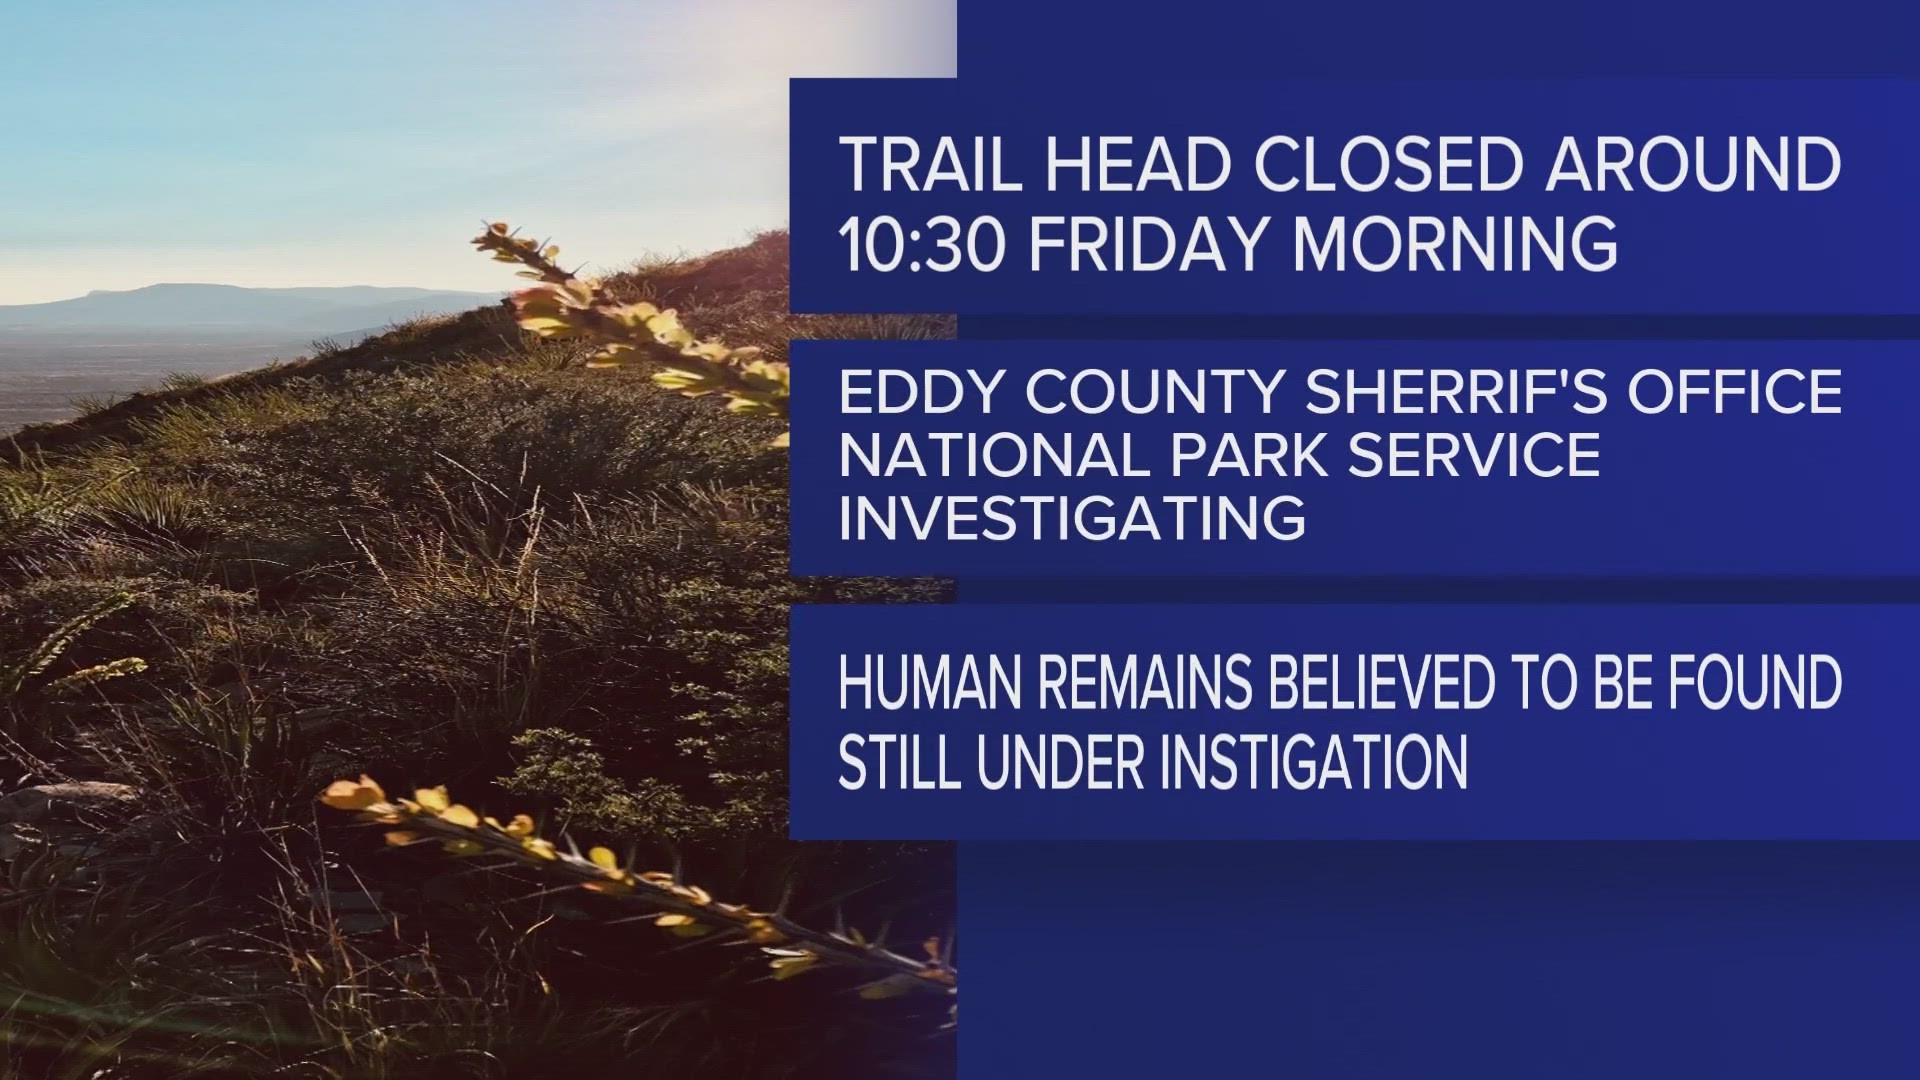 The Yucca Canyon Trail has now reopened after an investigation by the Eddy County Sheriff's Office and National Park Service.